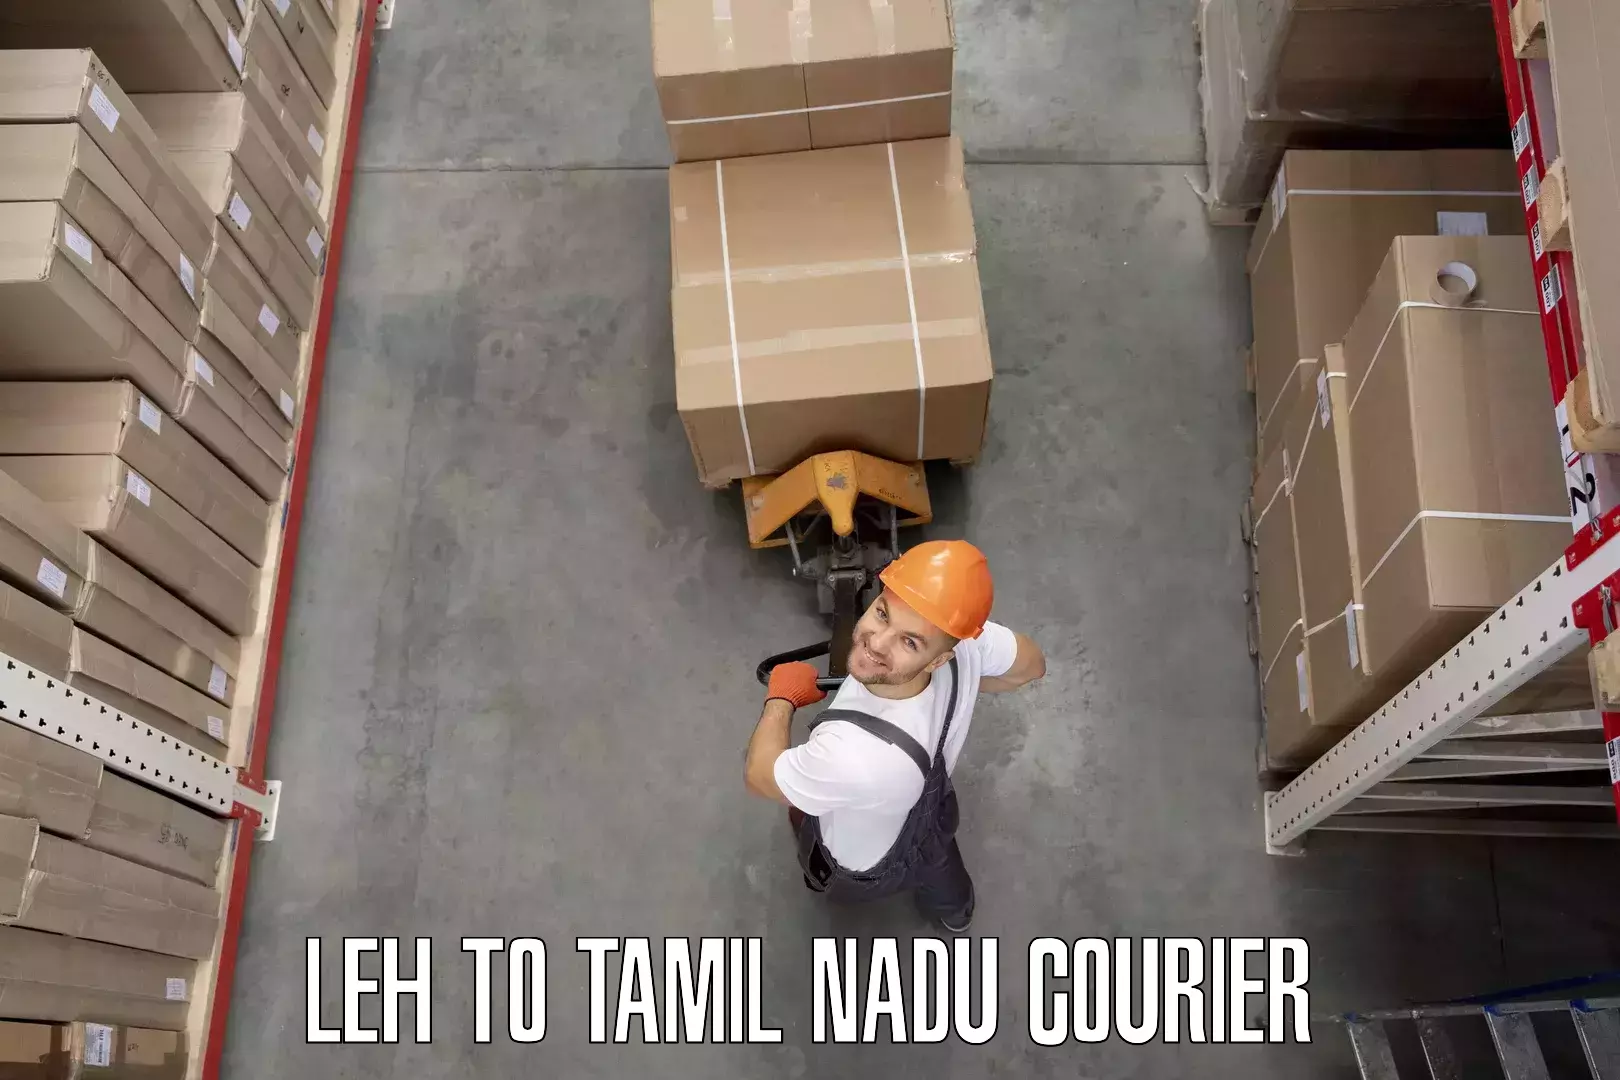 Furniture delivery service Leh to Thisayanvilai